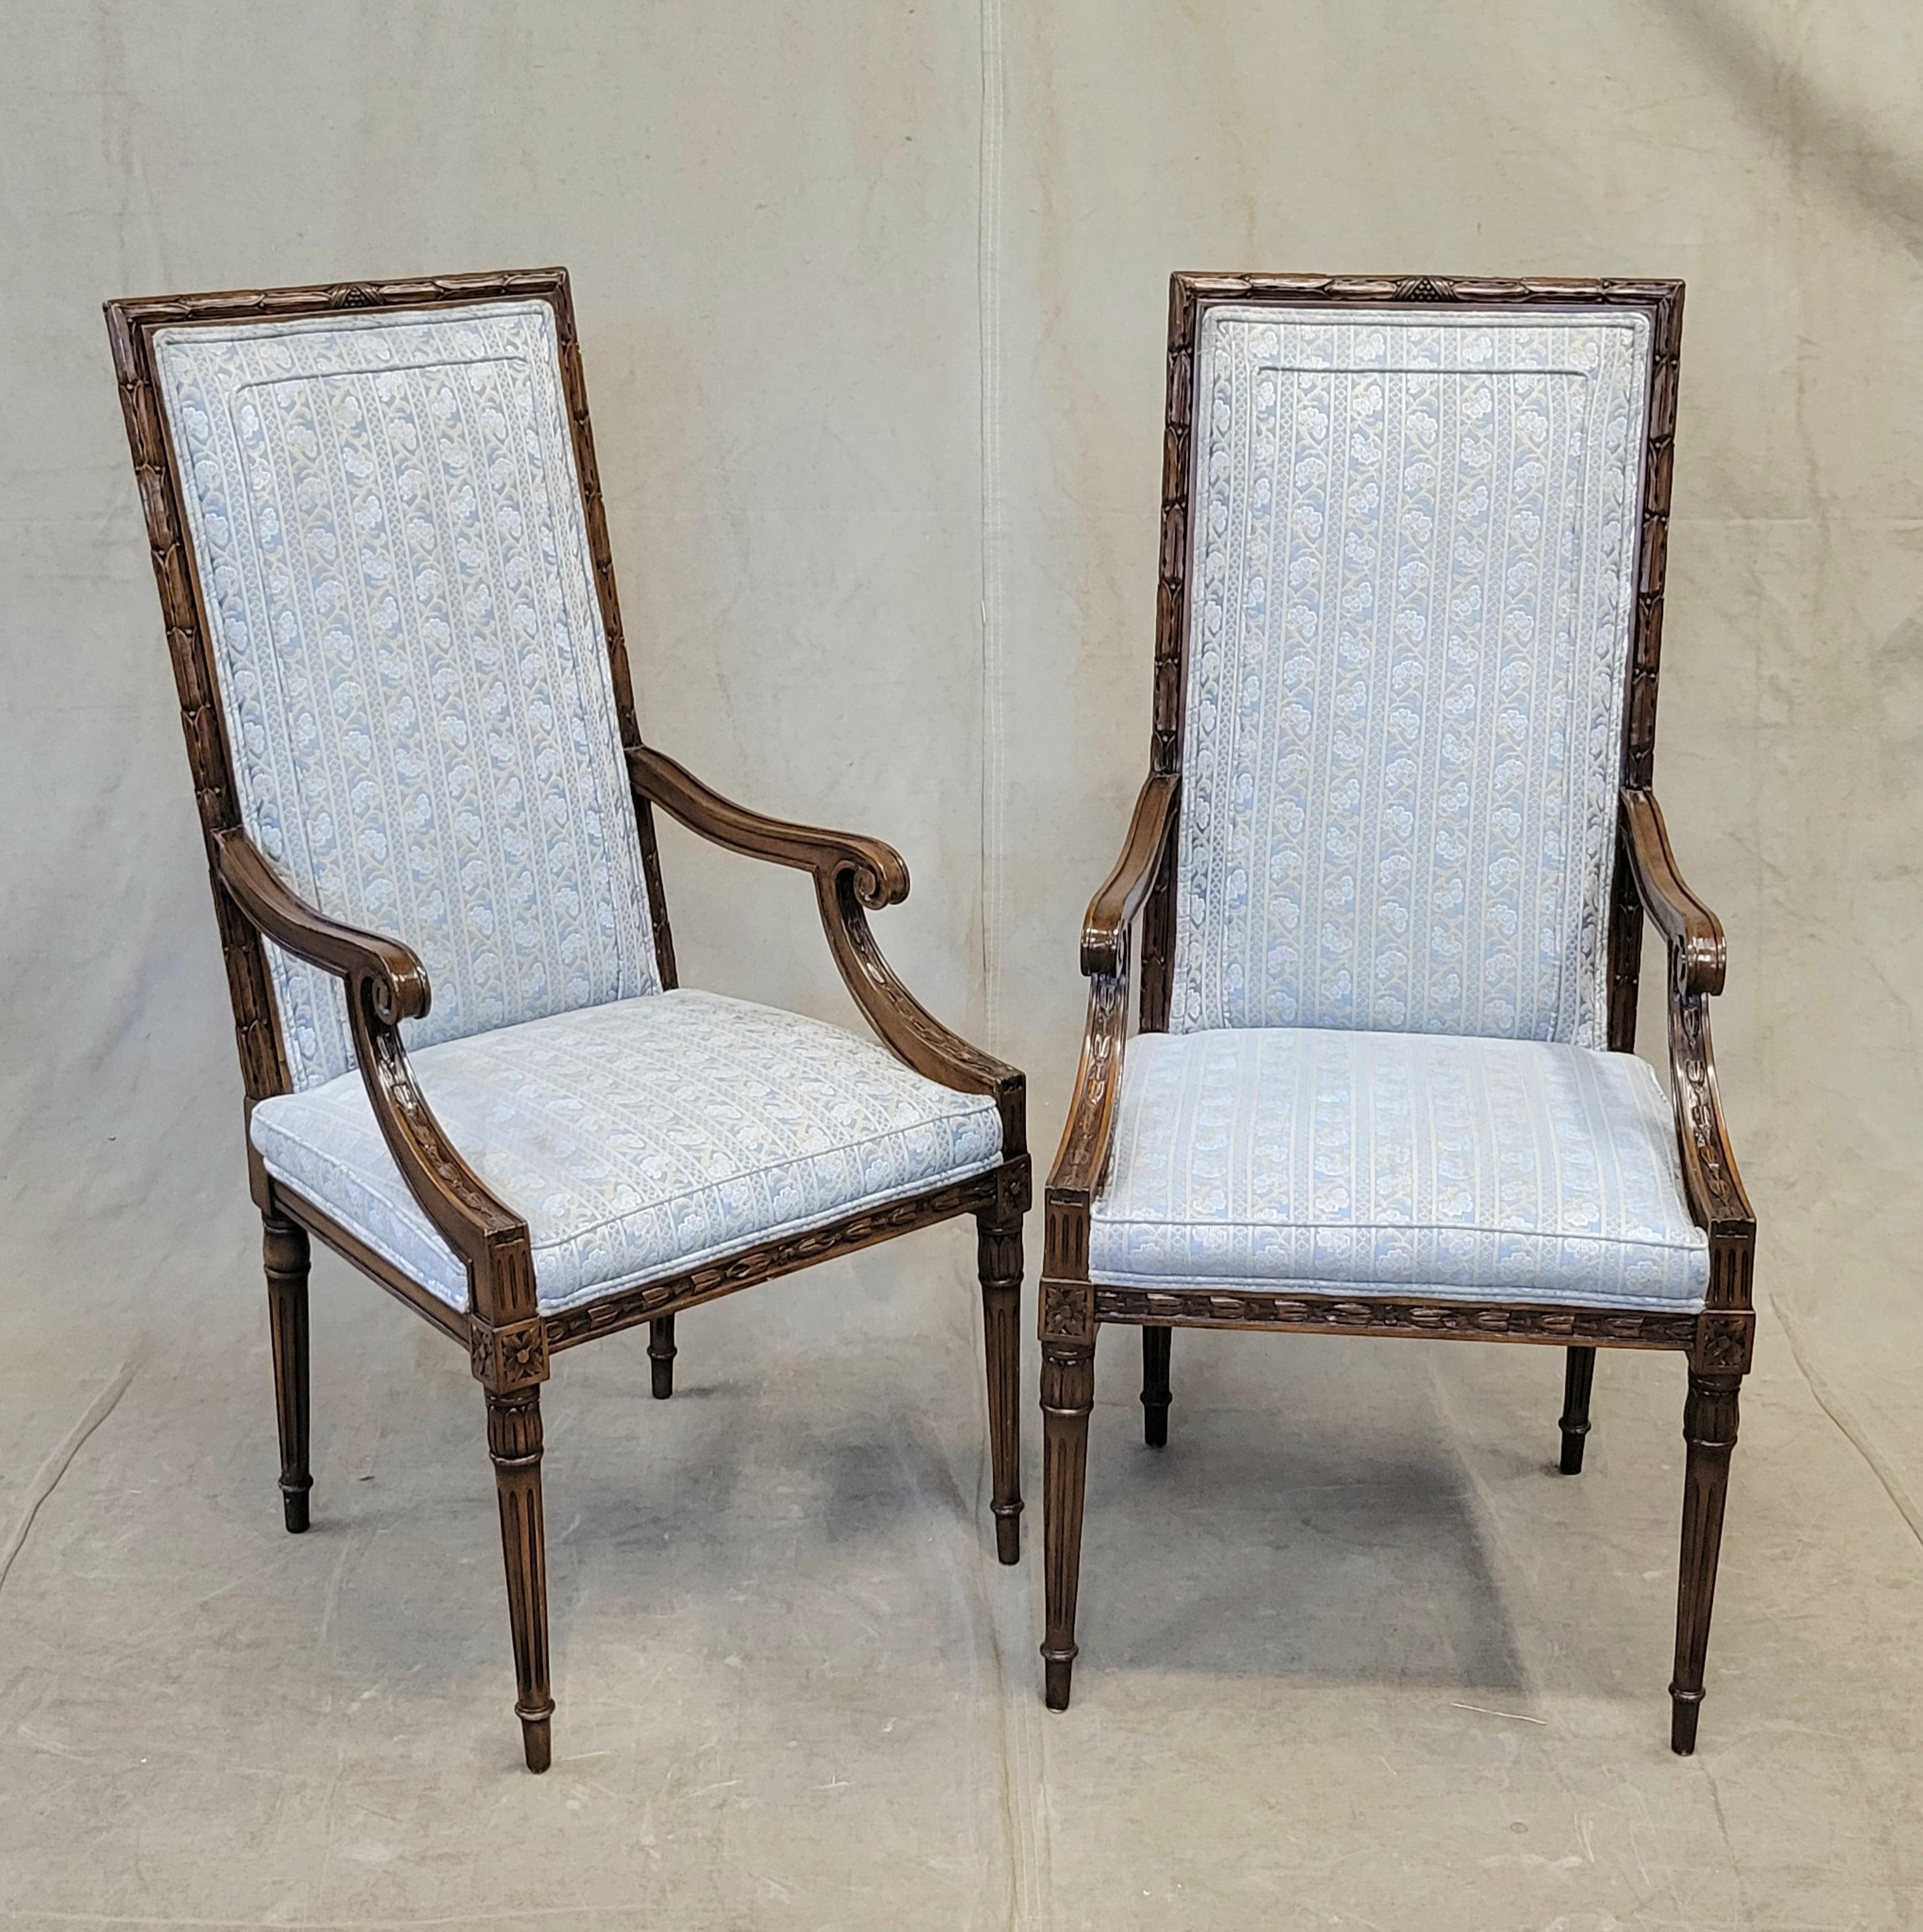 A truly elegant set of eight vintage (1960s or 1970s) beautifully crafted Karges richly carved dark walnut finish dining chairs with pale blue and cream colored striped upholstery. Hand carving on the chairs in acanthus leaves and bellflowers,